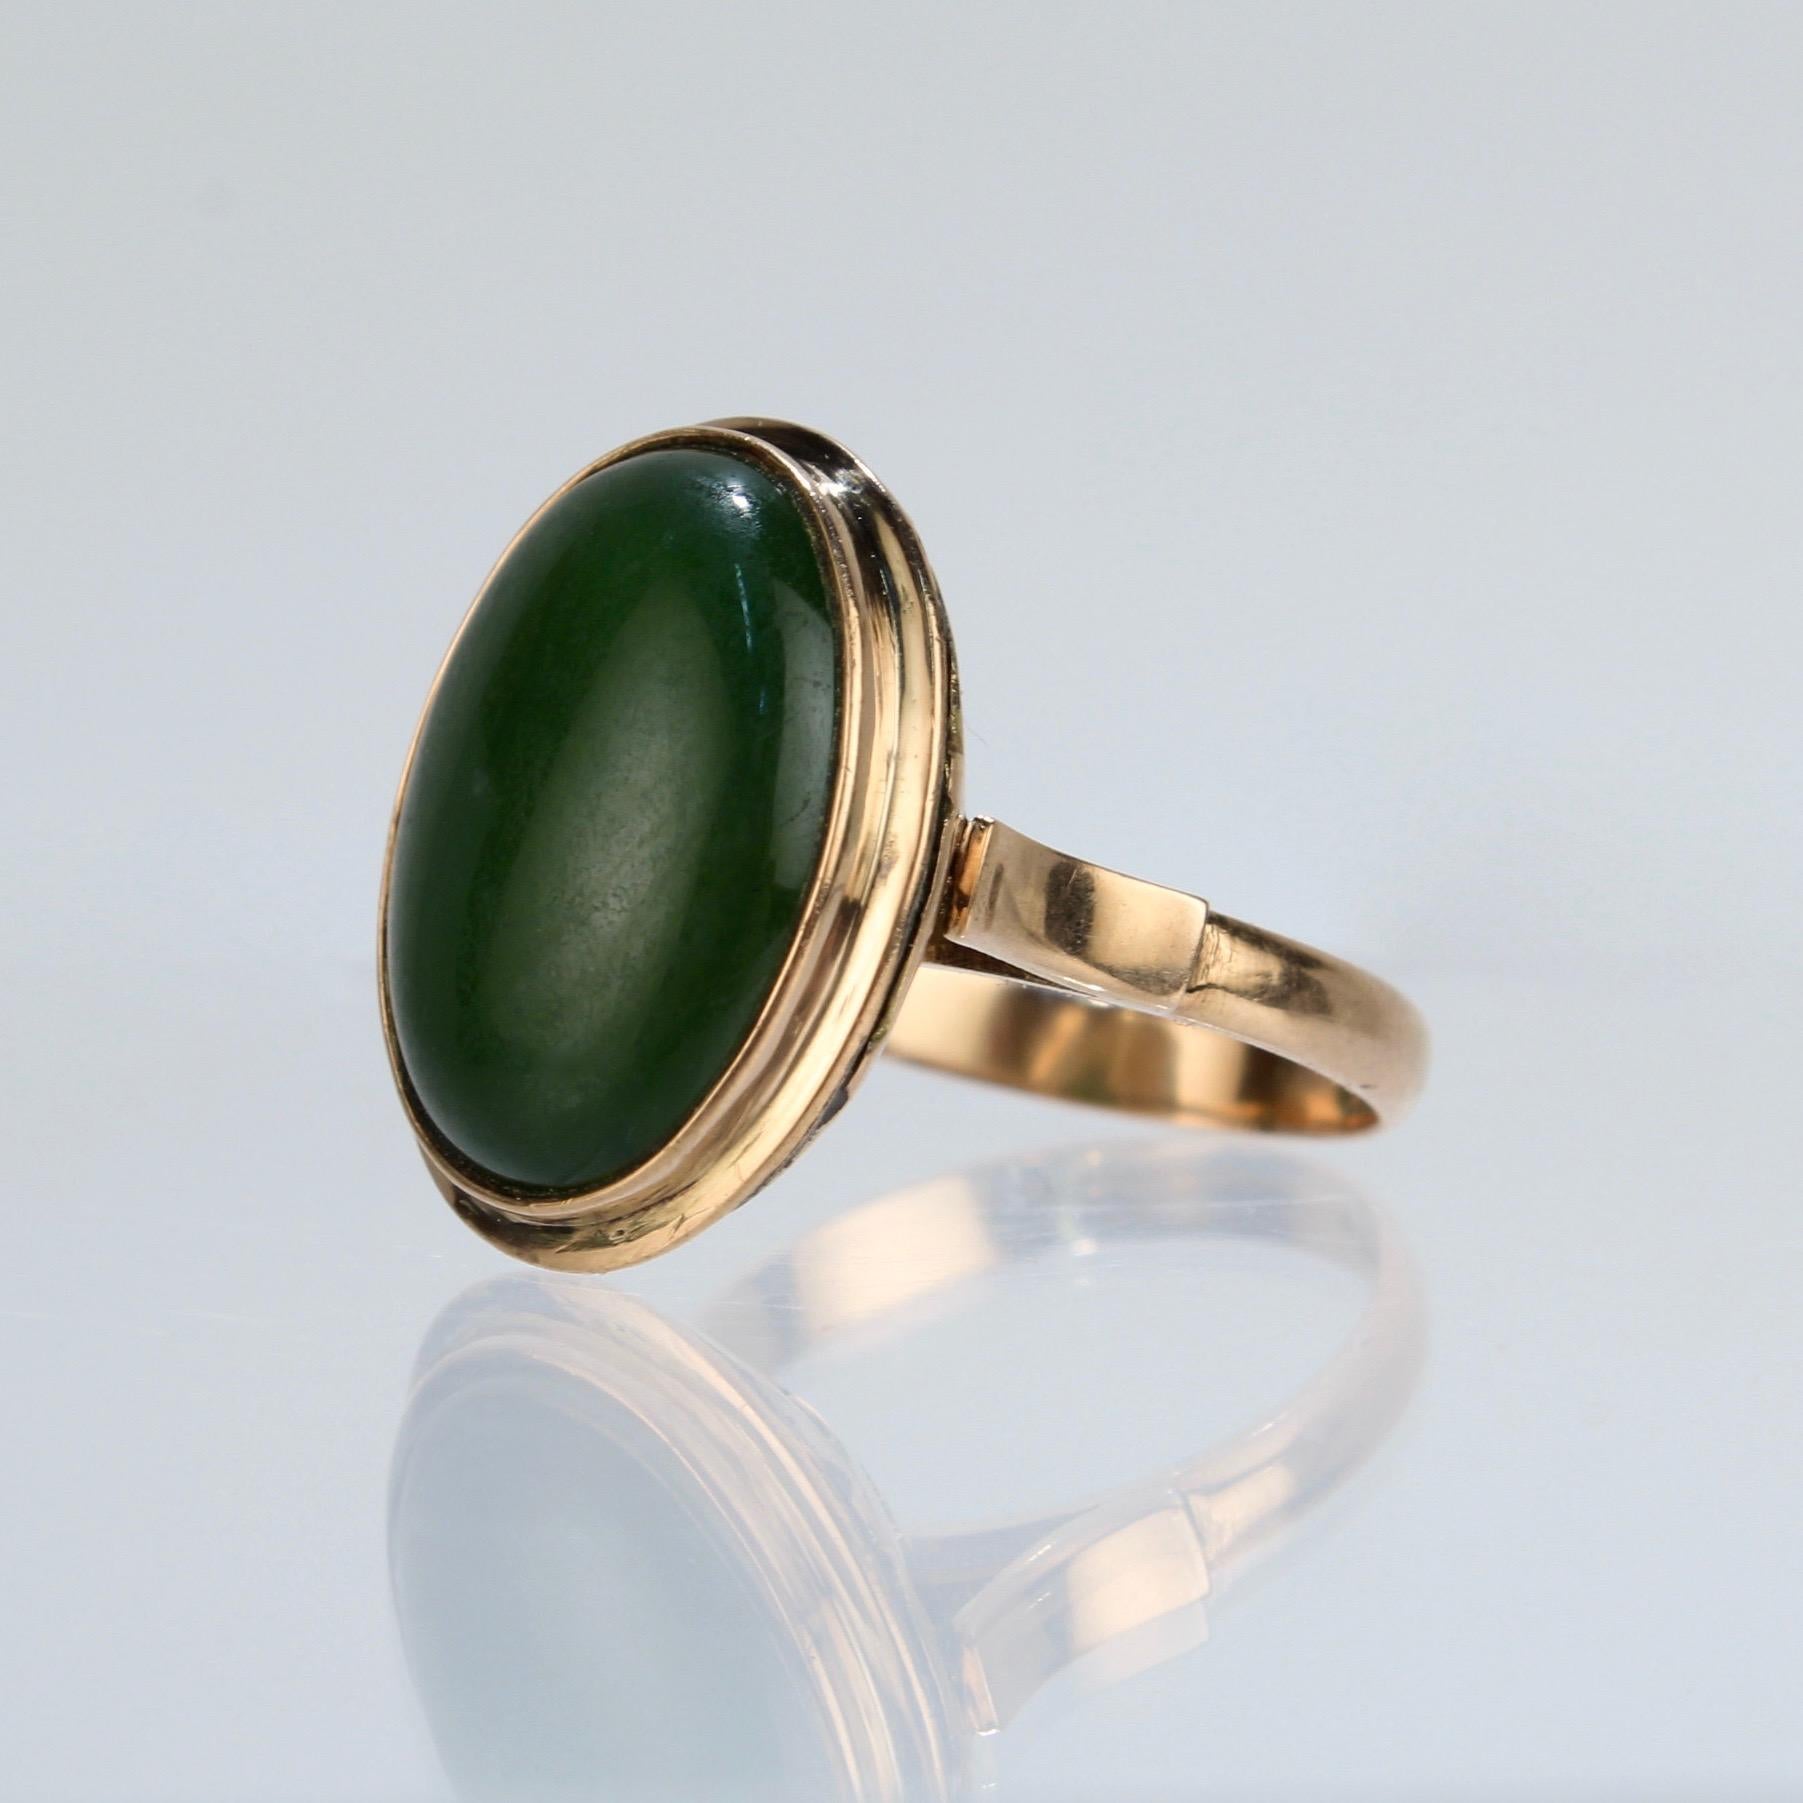 A fine gold and jade cabochon ring in the Chinese taste.

The nephrite jade cabochon is dark green in color and is bezel set in a setting with a pierced gallery on the underside. This openwork allows light to enter the stone from the underside.